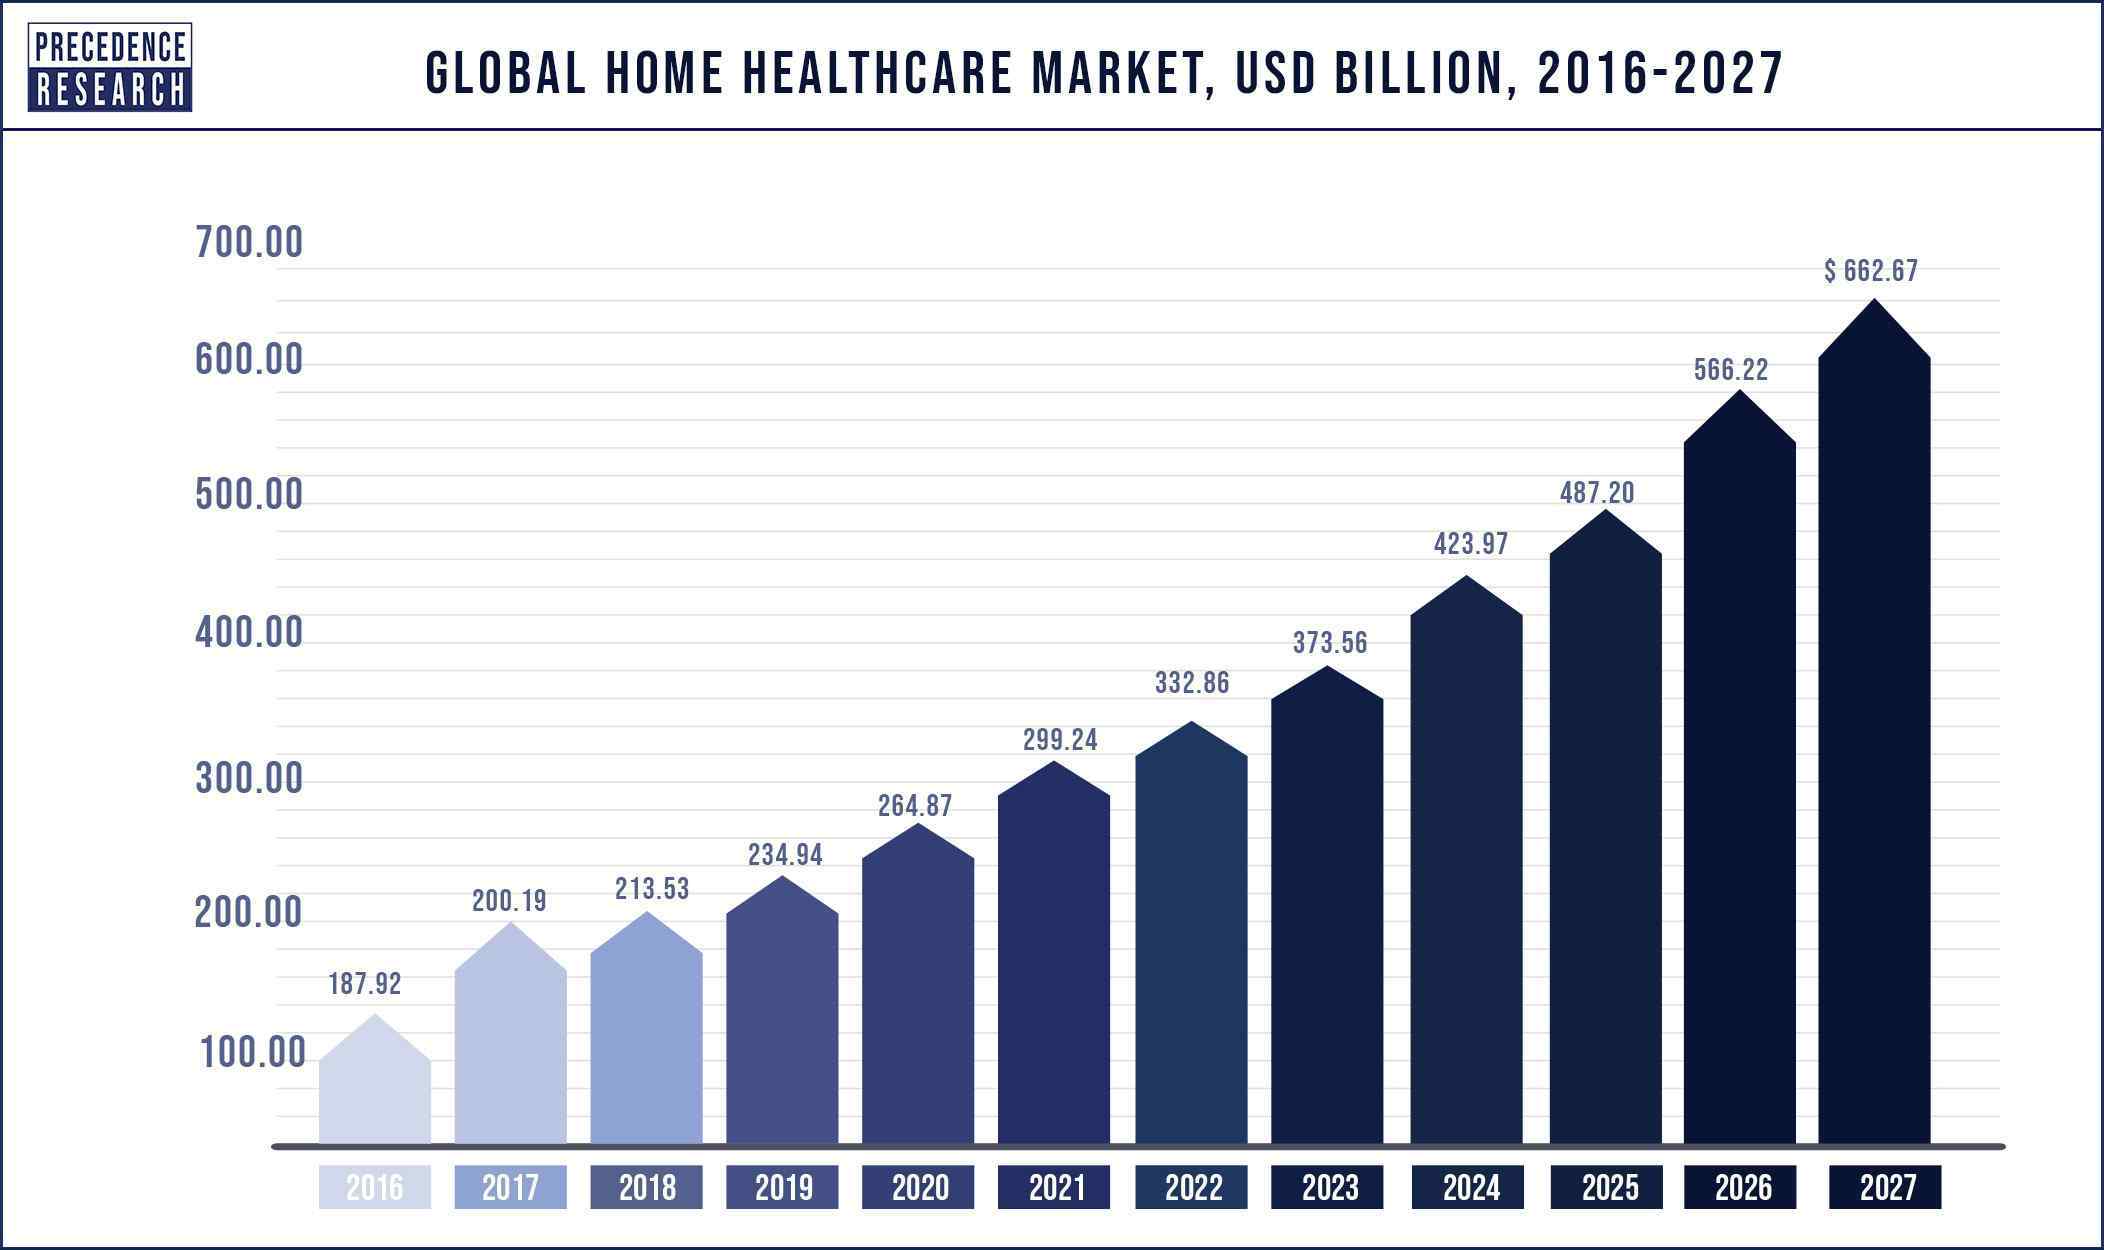 Home Healthcare Market Size 2016 to 2027